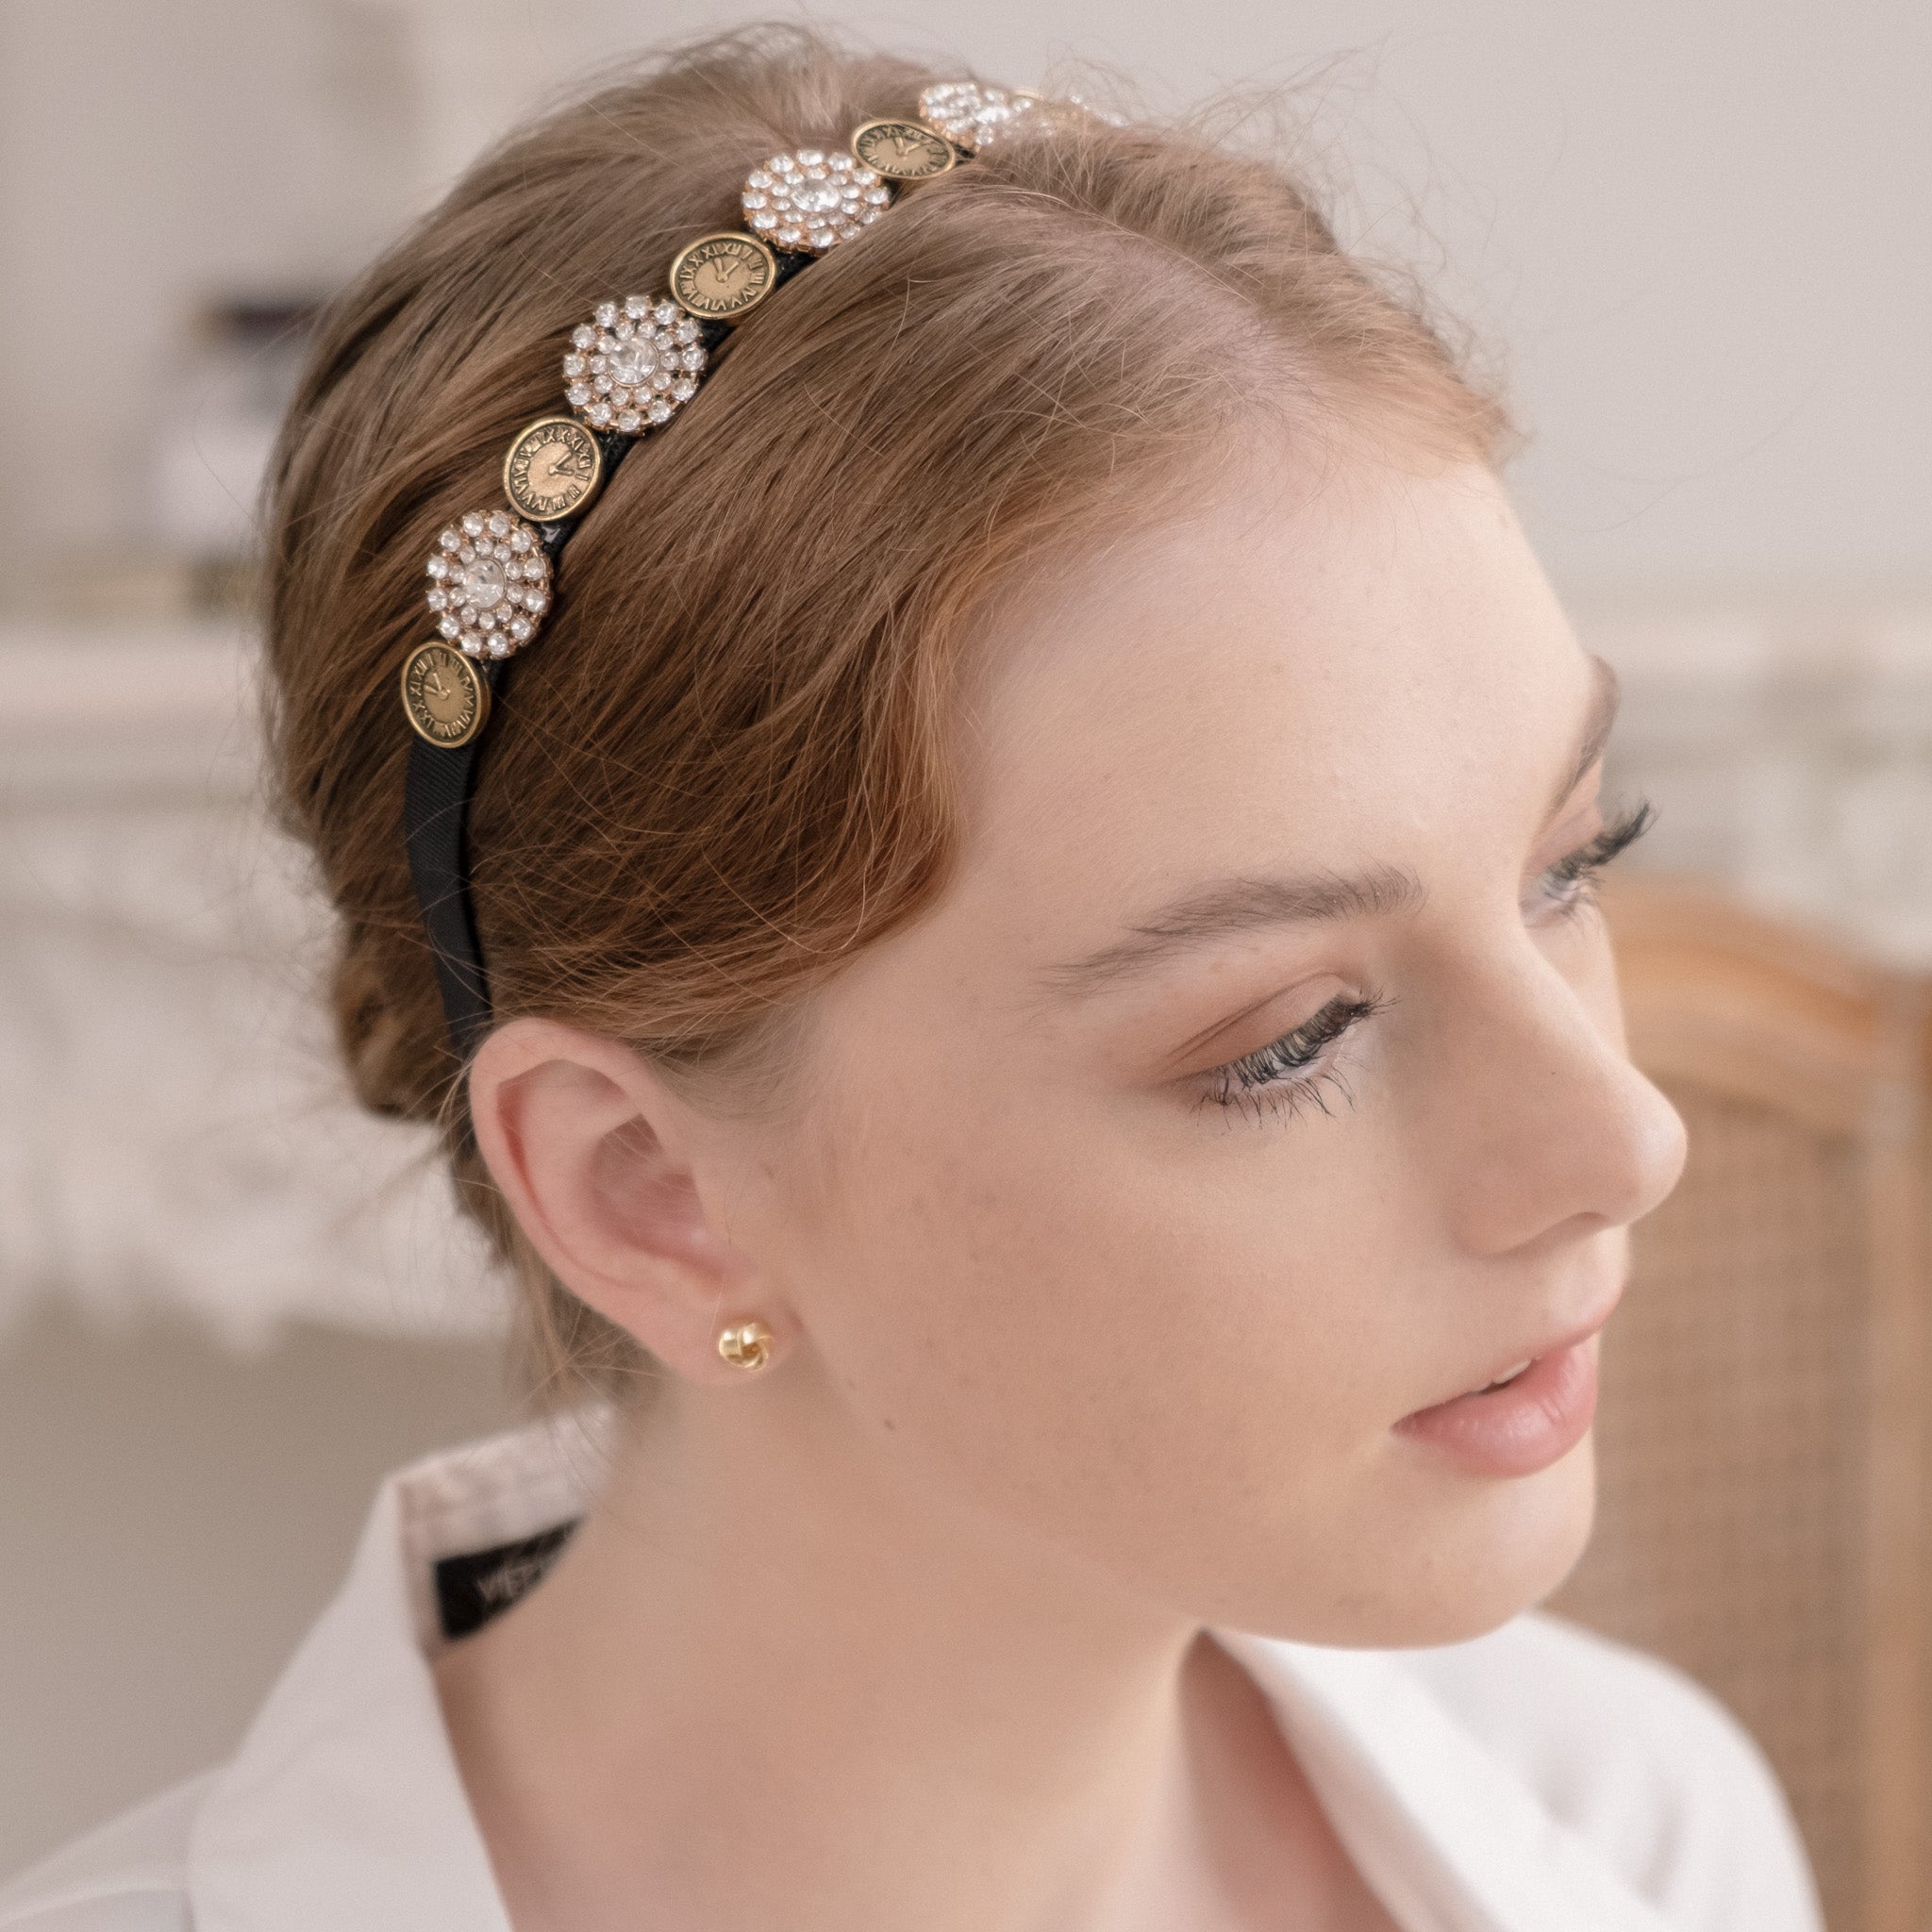 Wedding Headband for Pre-Shoots and Bridal Gifts